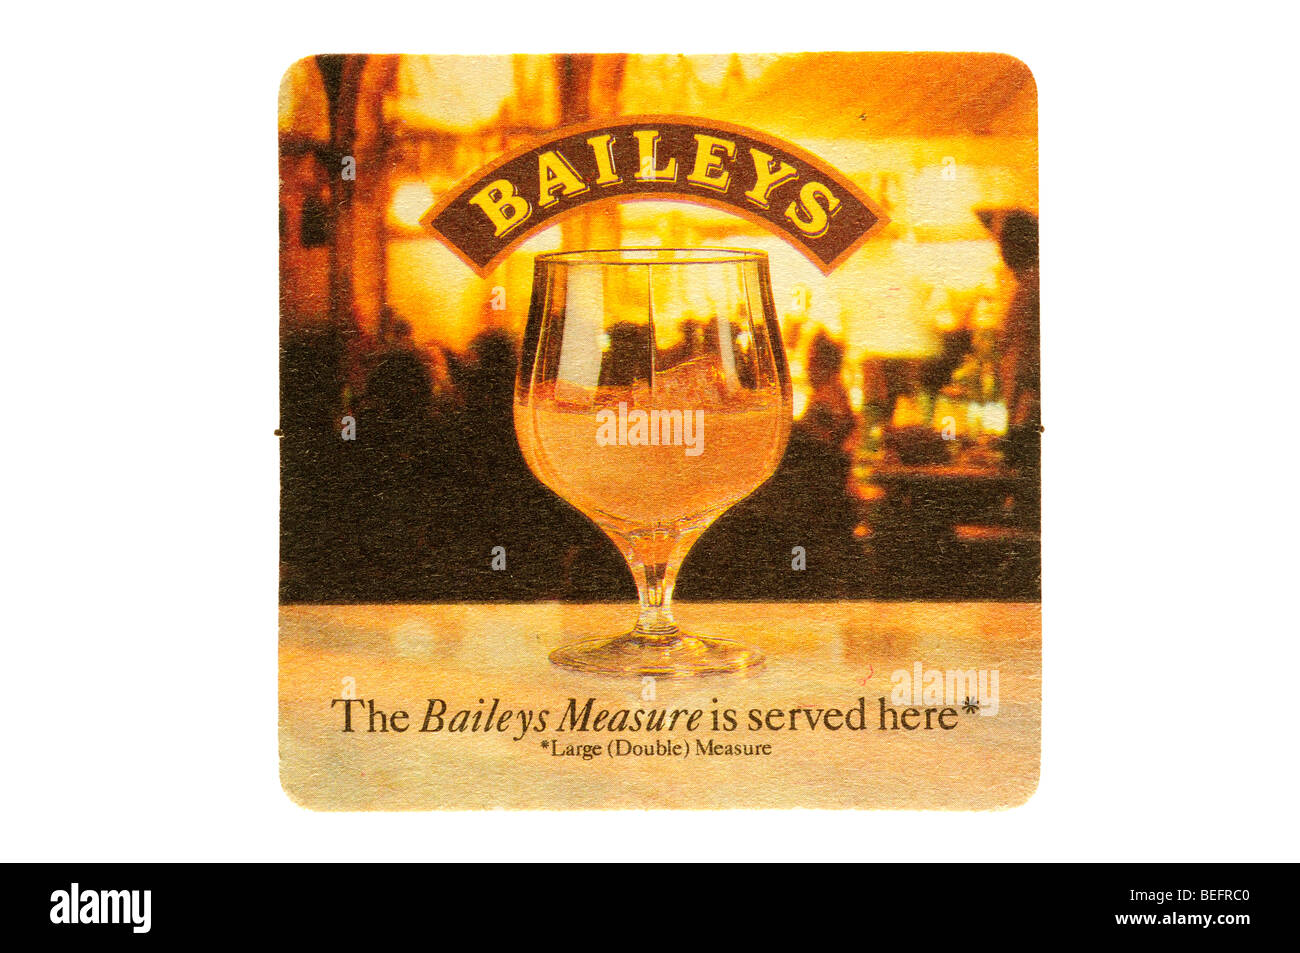 baileys the baileys measure is served here Stock Photo